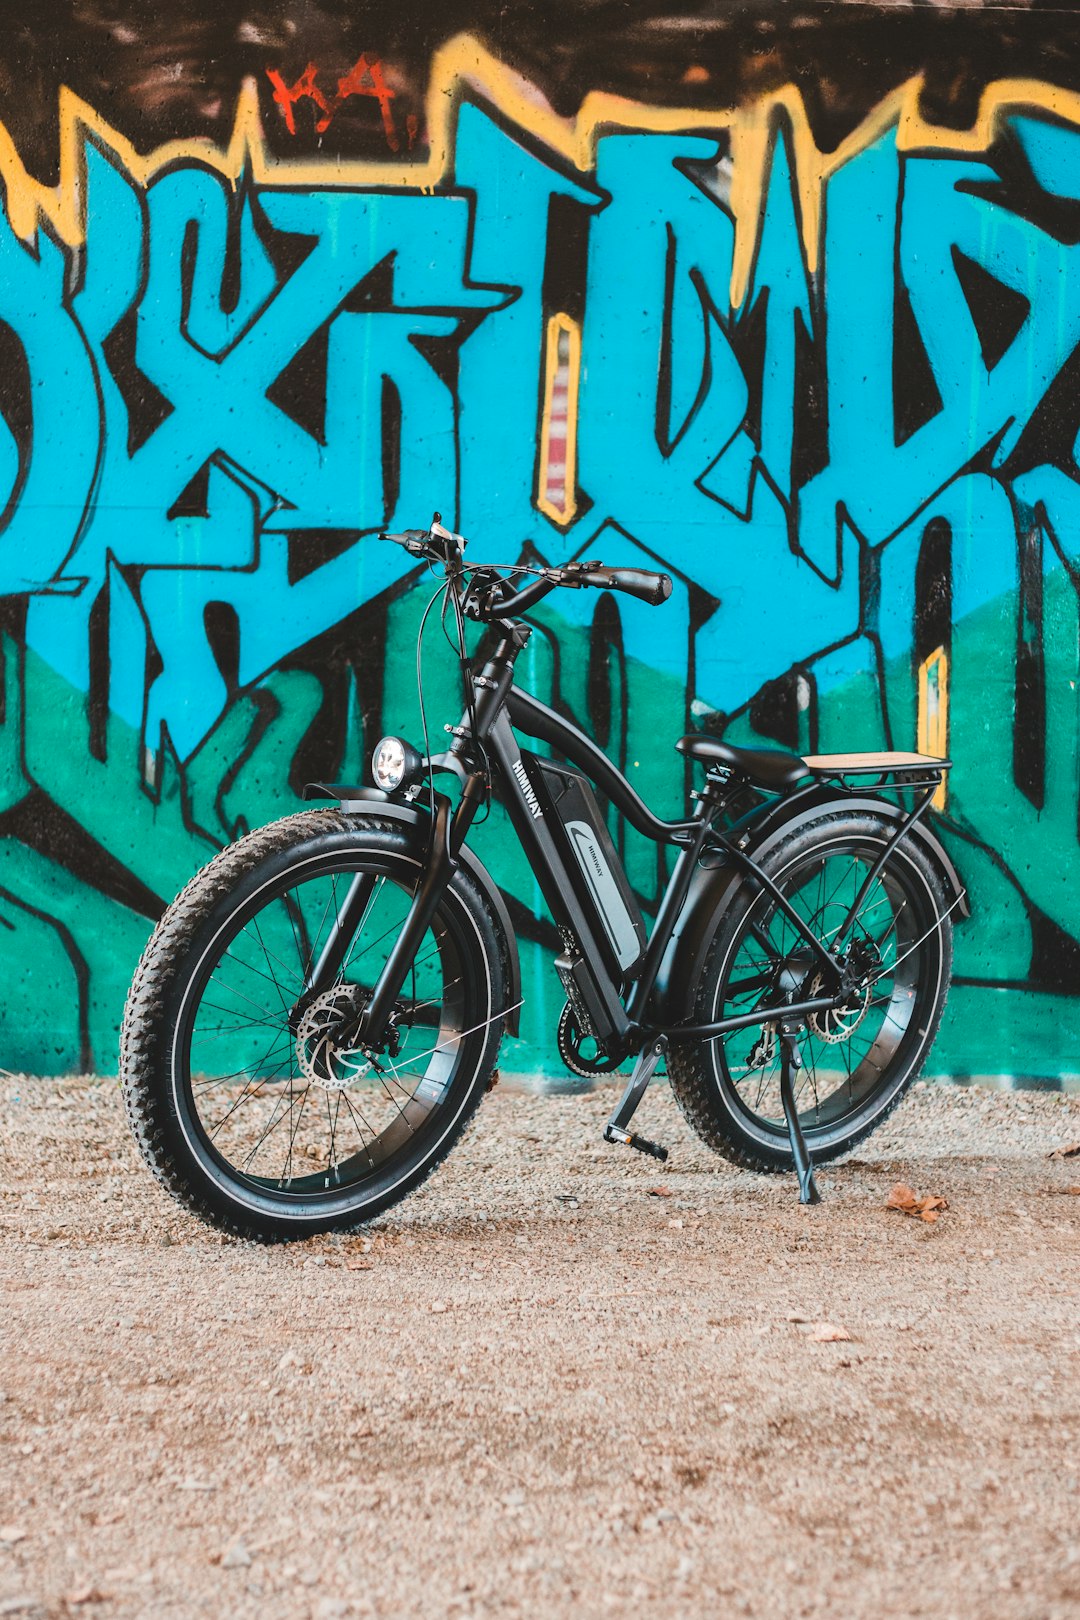 black and gray mountain bike leaning on wall with graffiti